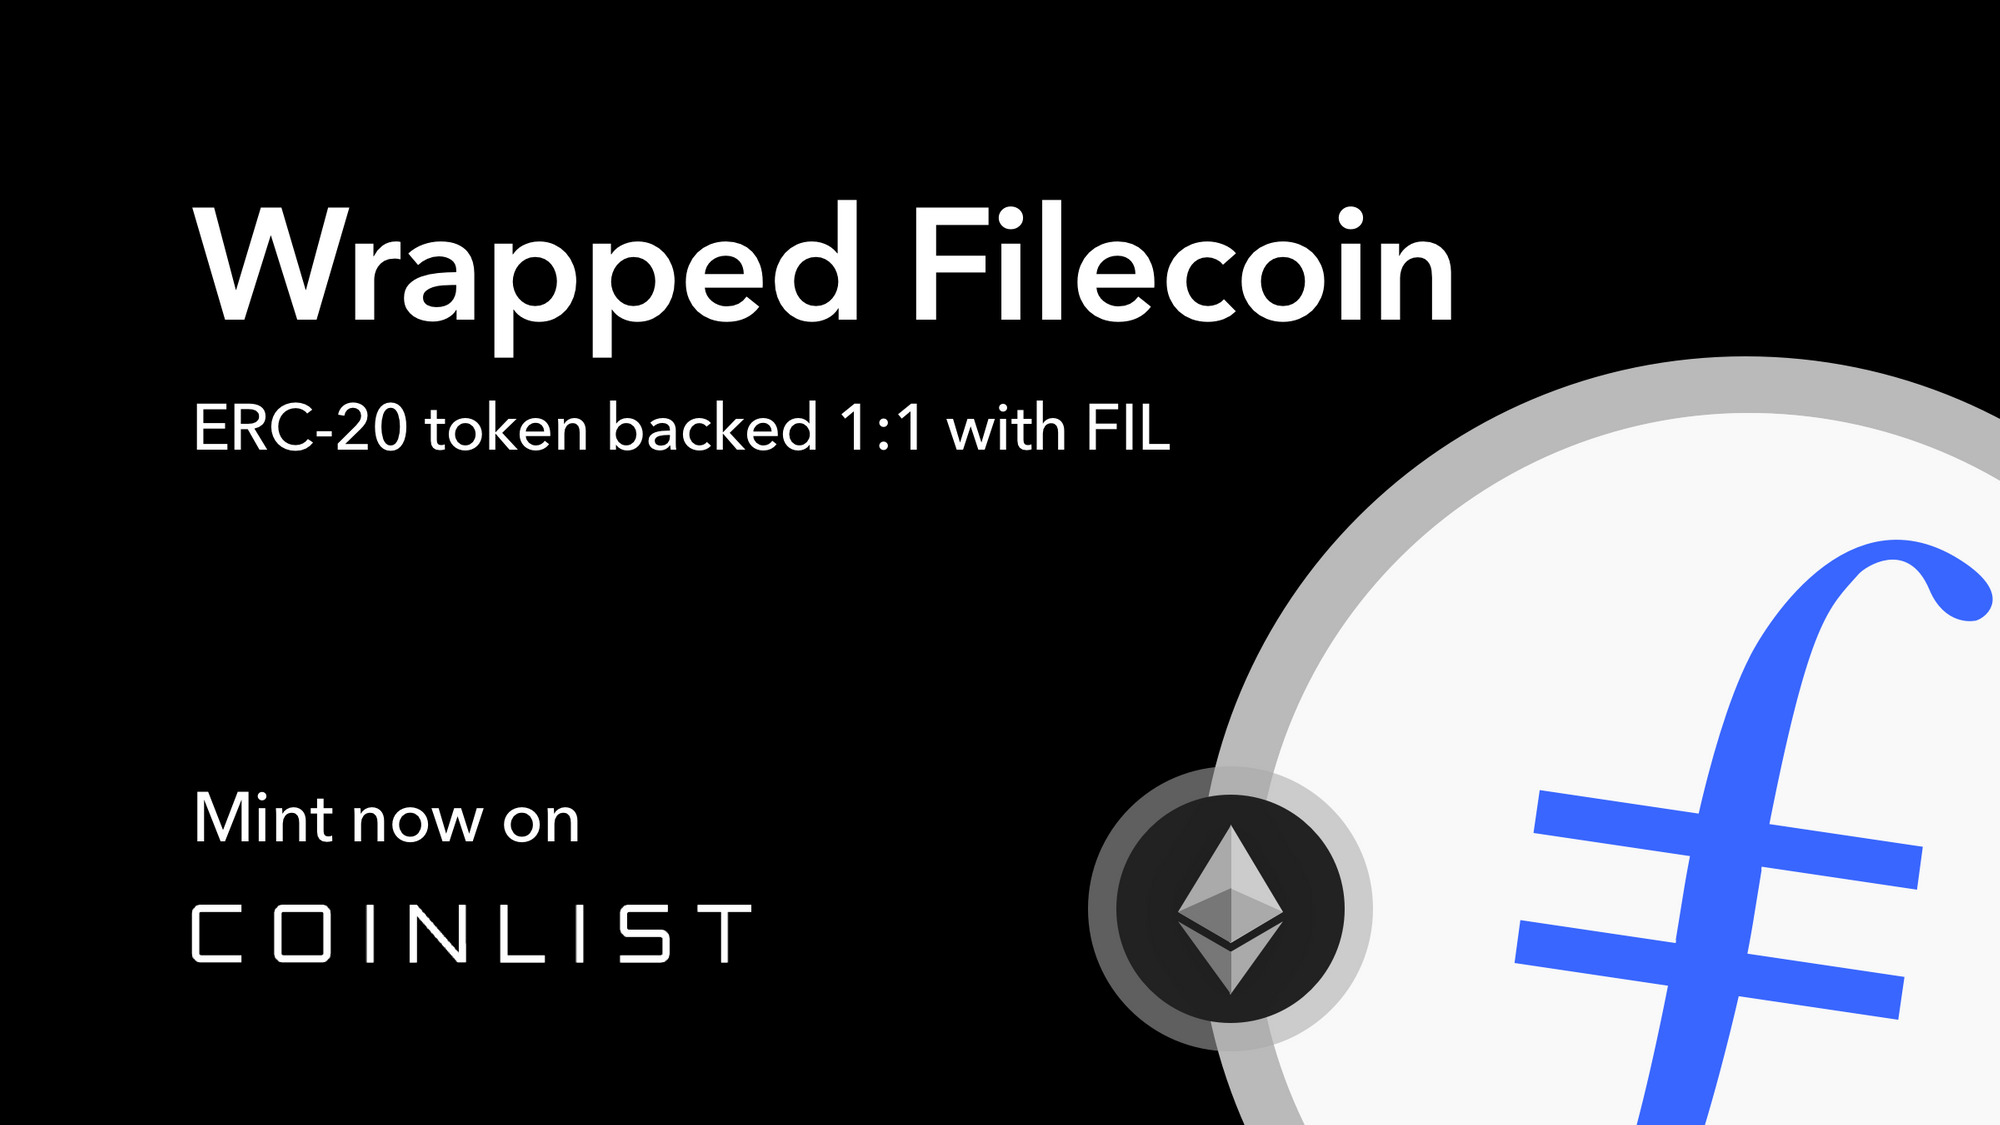 Introducing Wrapped Filecoin (EFIL) Minting on CoinList